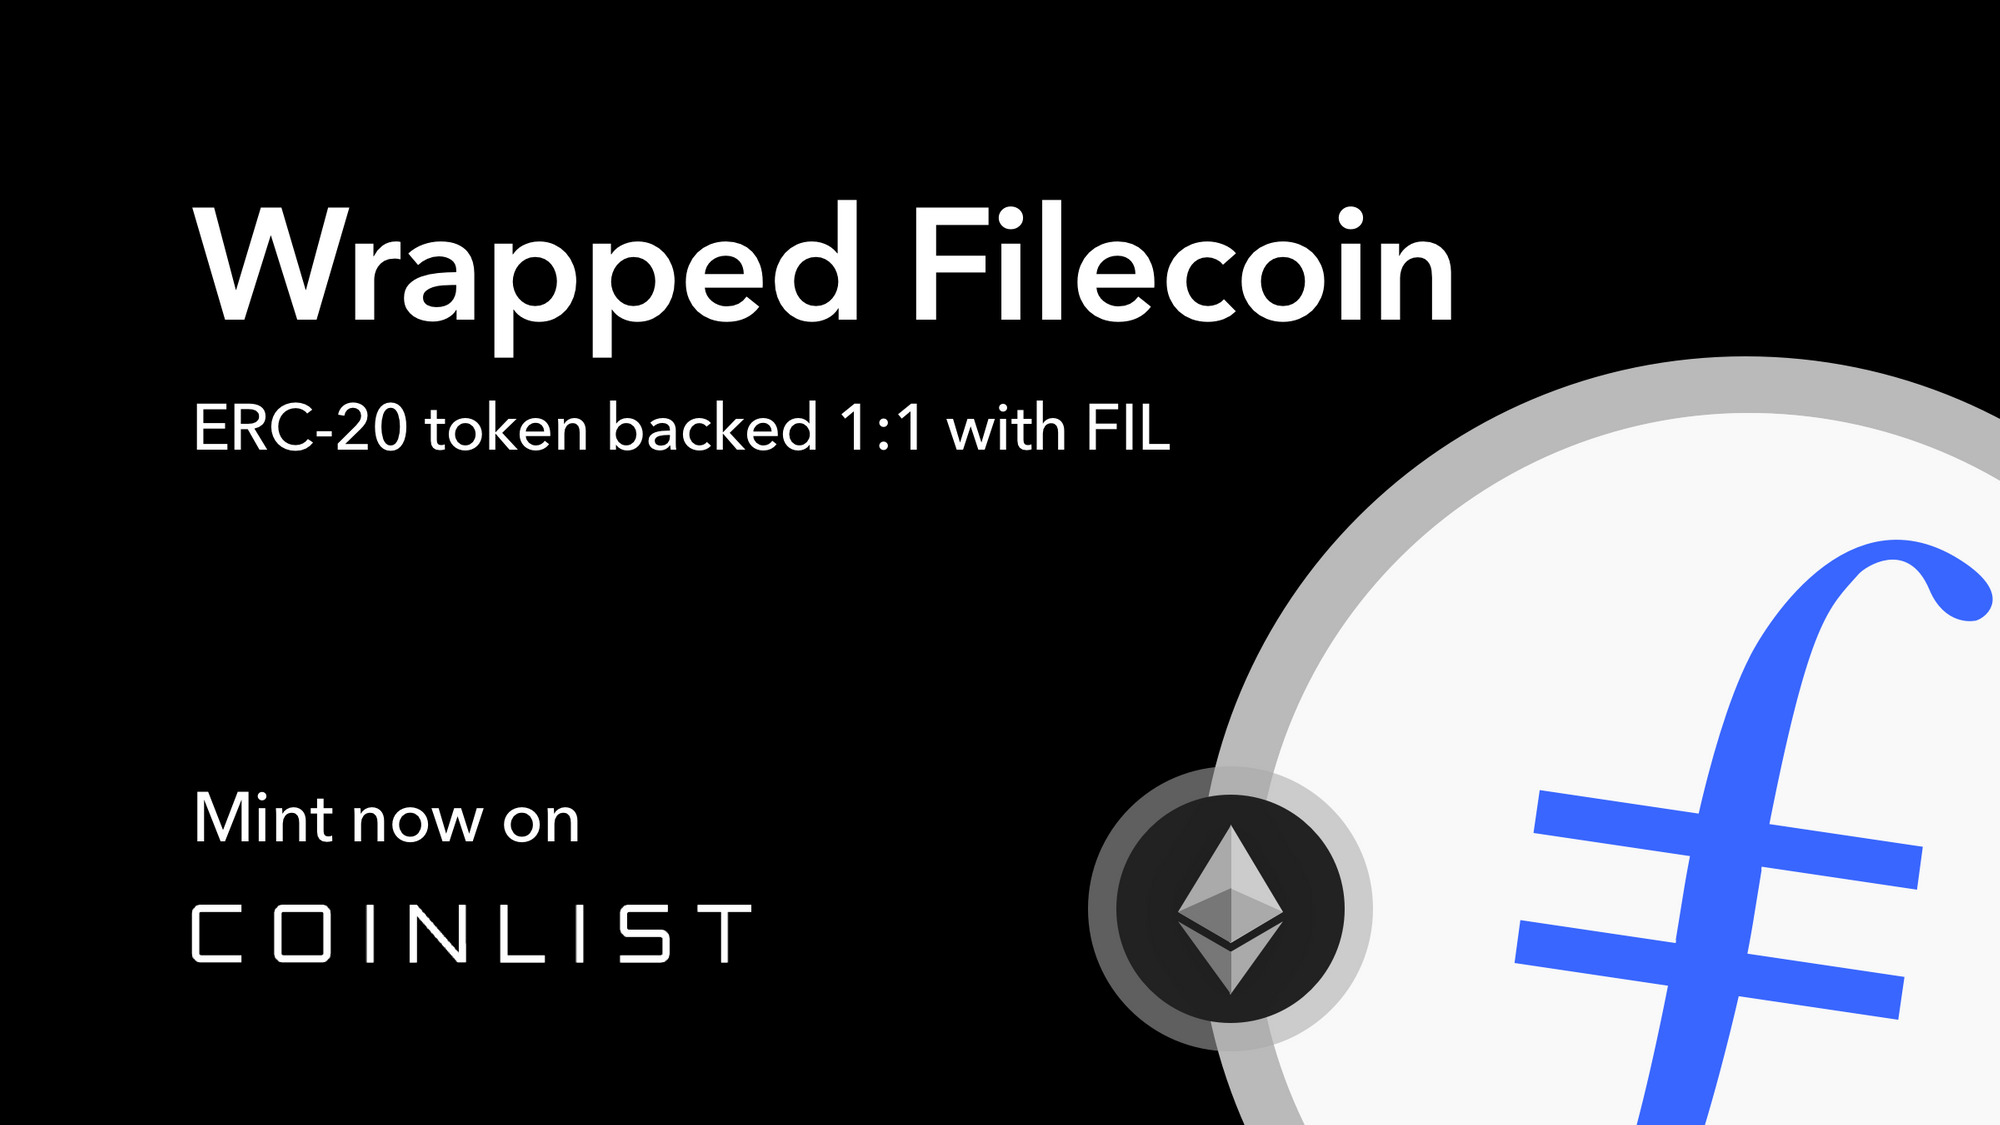 Introducing Wrapped Filecoin (EFIL) Minting on CoinList